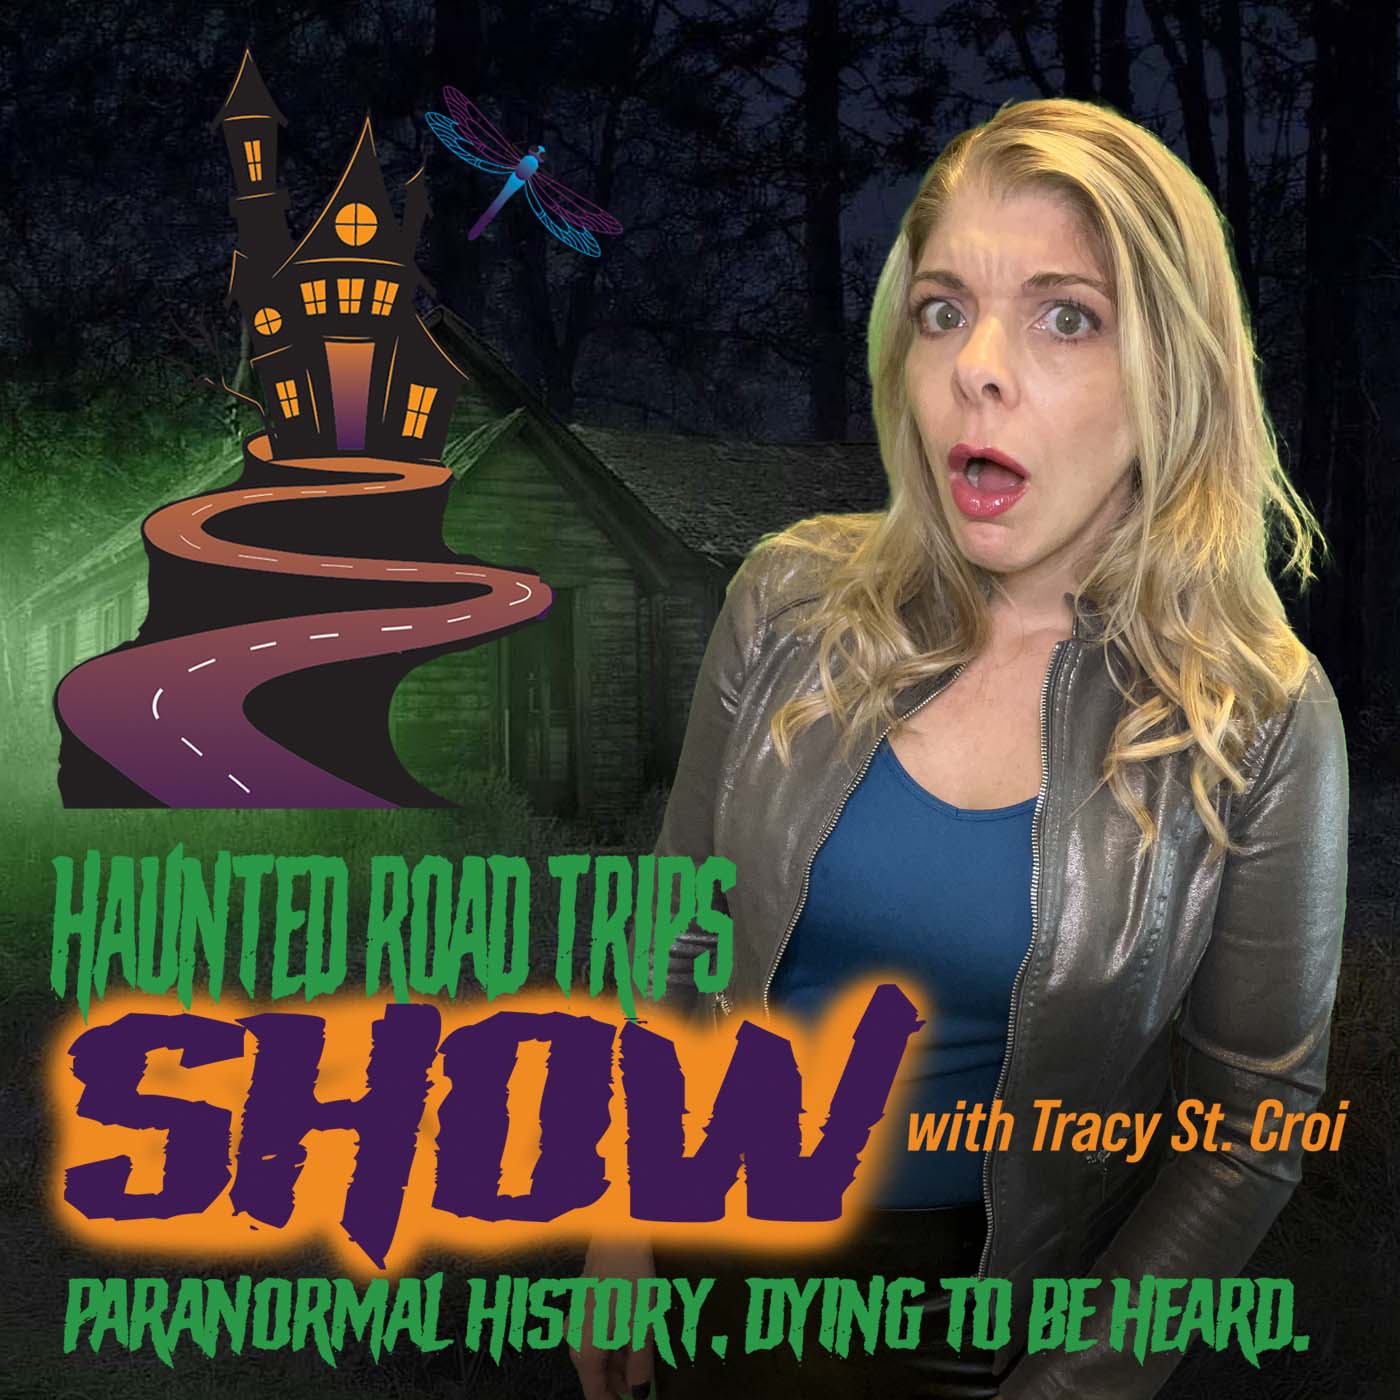 The Haunted Road Trips Show with Tracy St. Croi